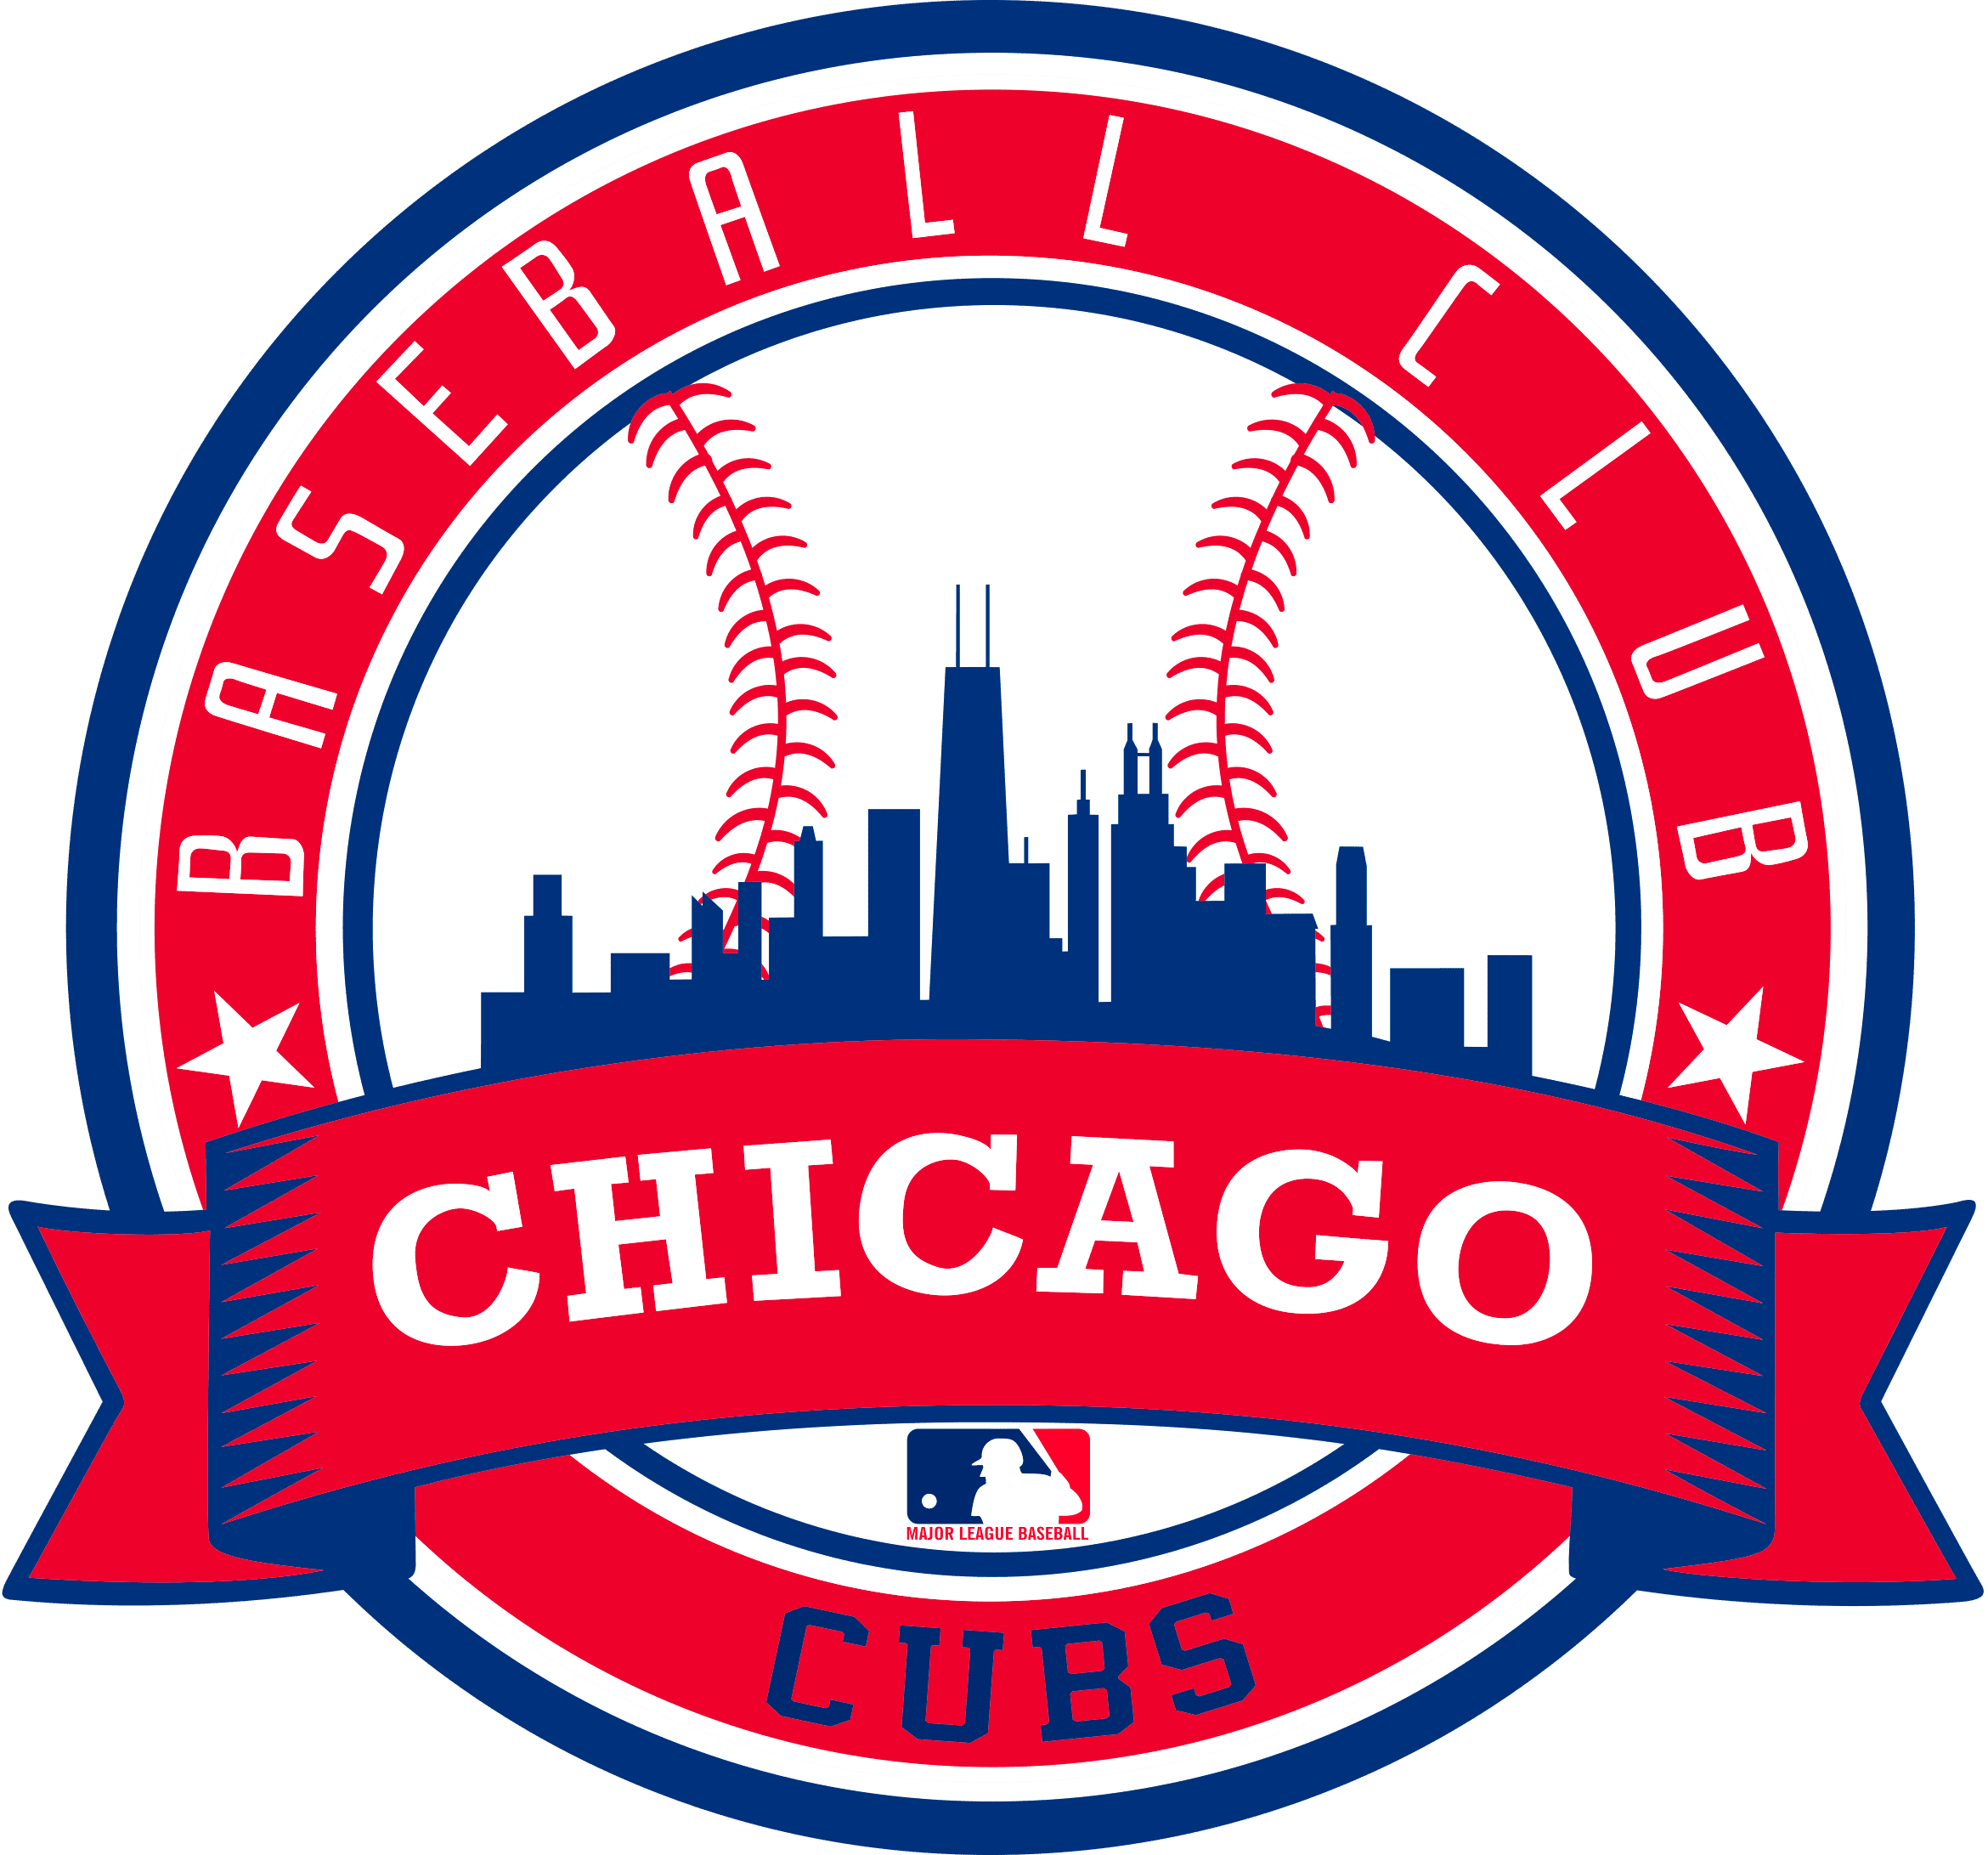 12 Styles MLB Chicago Cubs Svg, Chicago Cubs Svg, Chicago Cubs